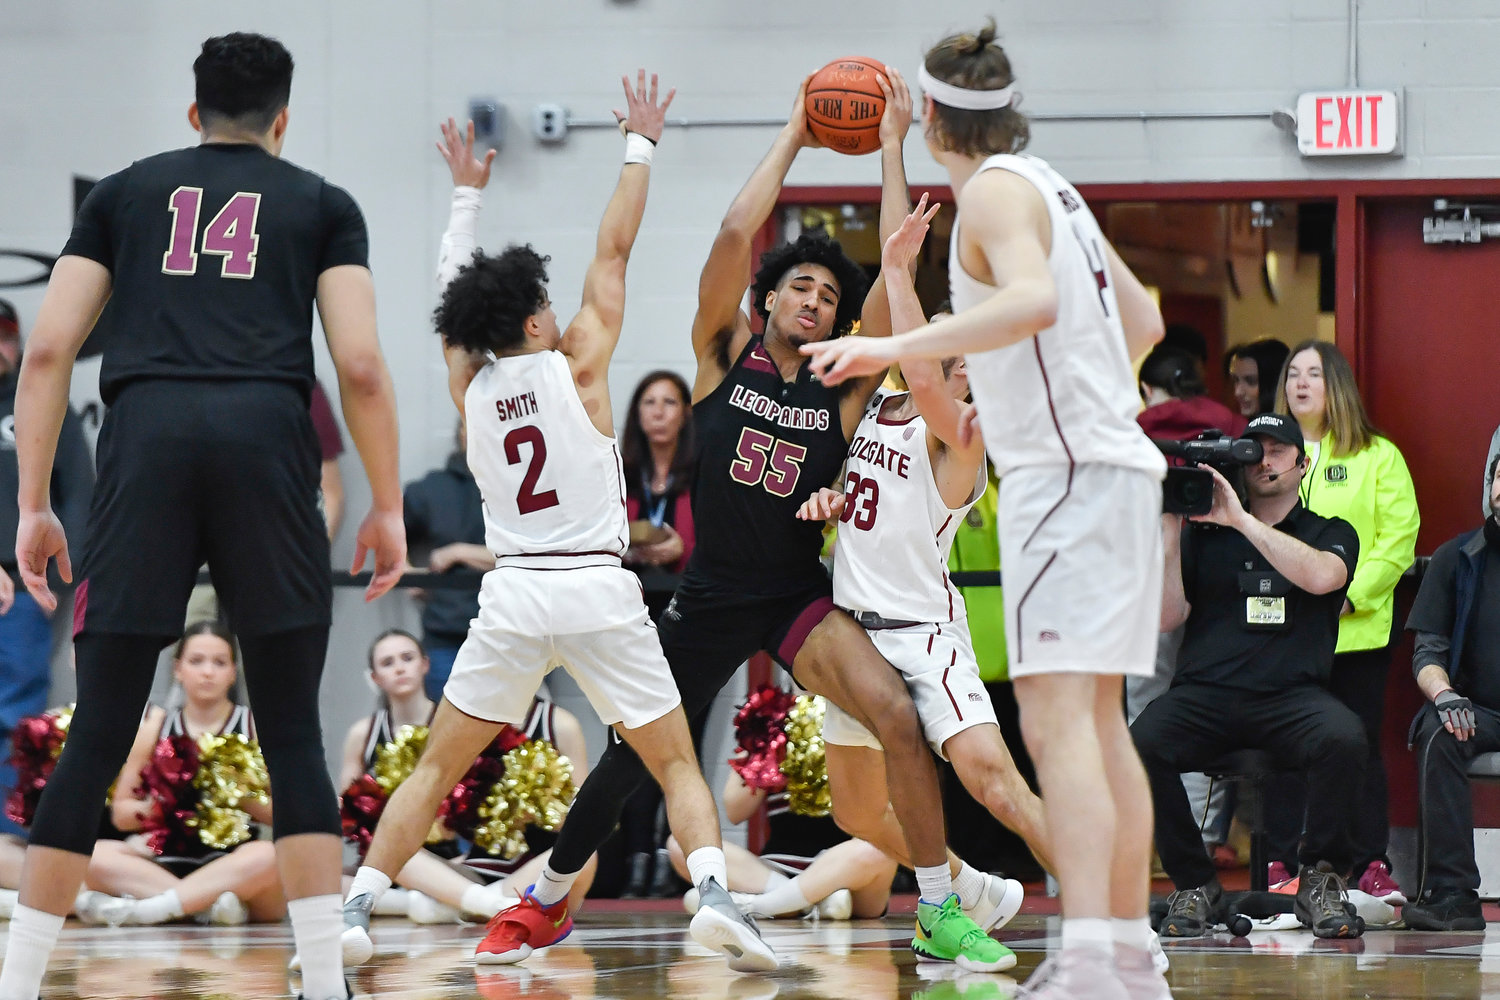 Lafayette forward Josh Rivera (55) is defended by Colgate guards Braeden Smith (2) and Oliver Lynch-Daniels (33) during the first half of the Patriot League Tournament championship on Wednesday night in Hamilton.